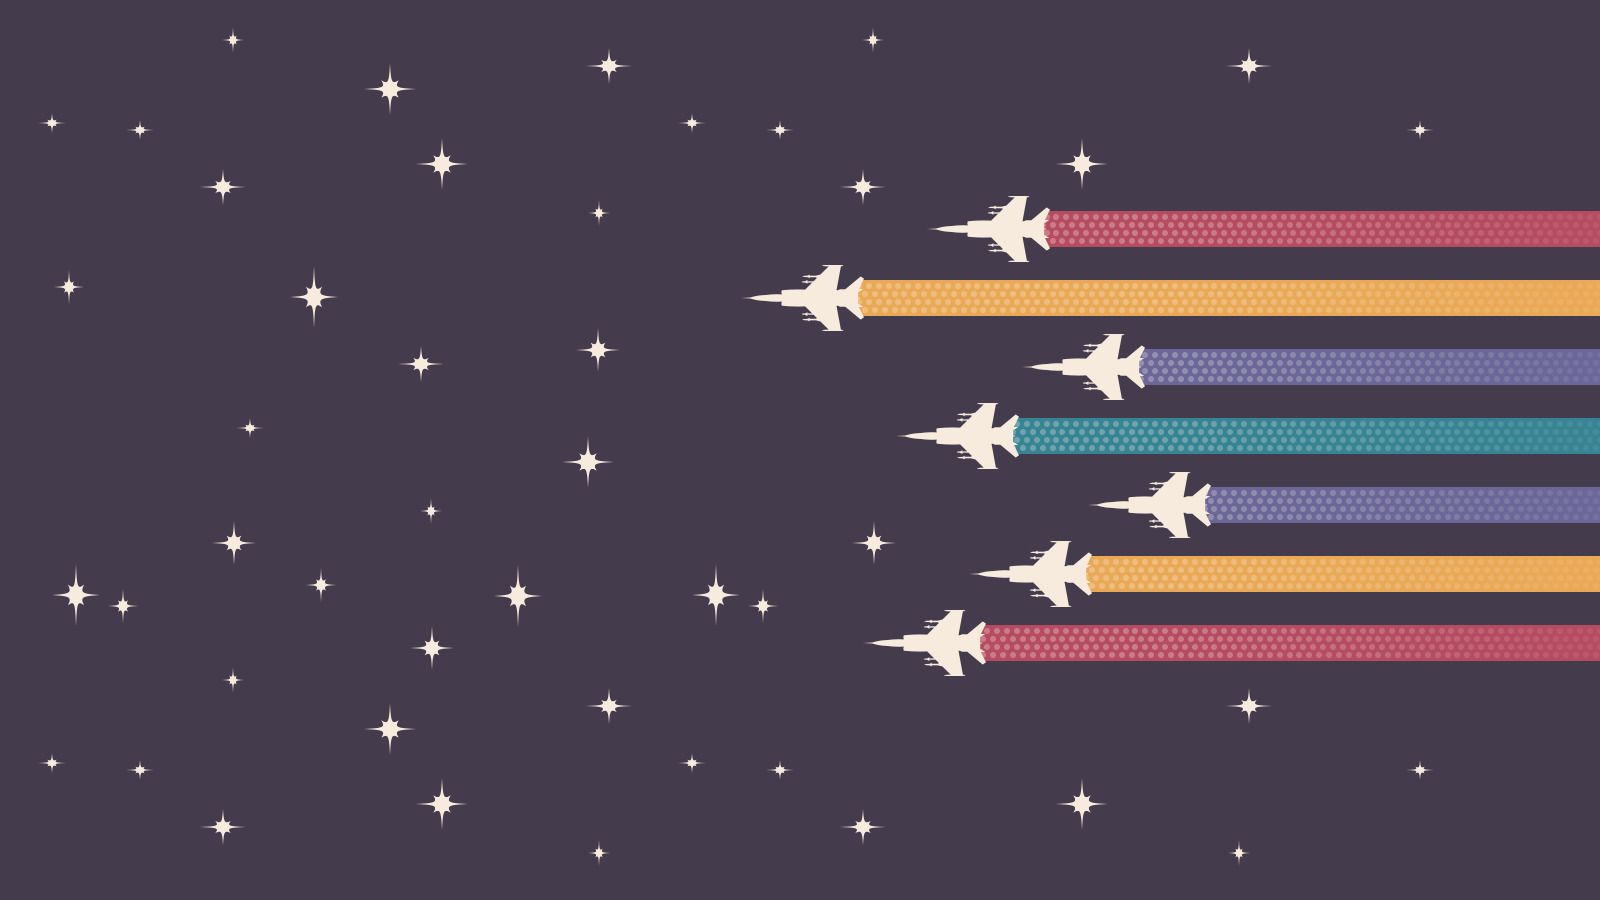 colorful, Space, Aircraft, Minimalism Wallpaper HD / Desktop and Mobile Background